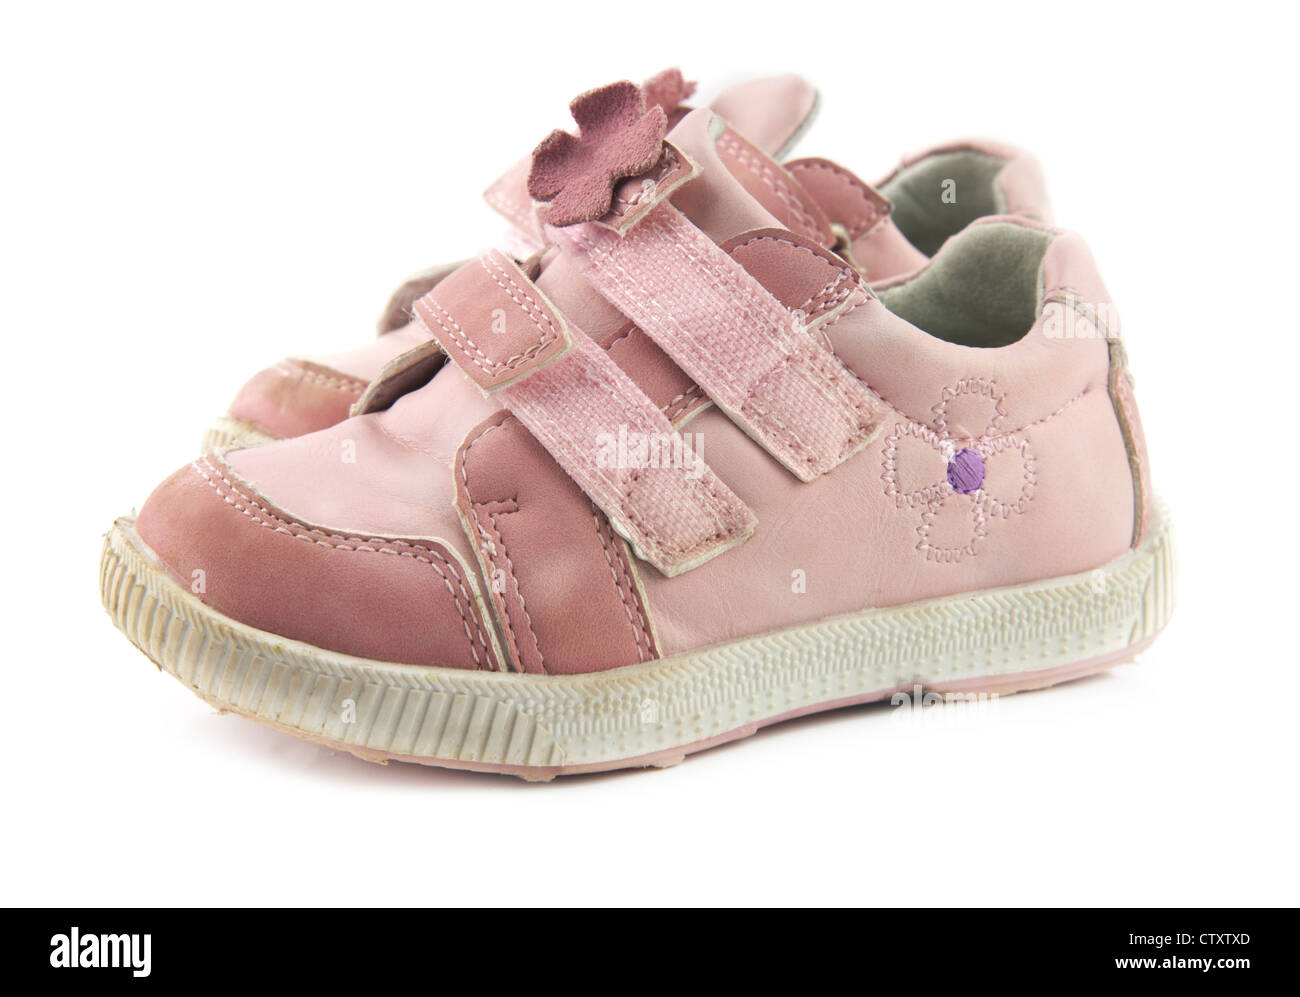 pair of children's shoes close up Stock Photo